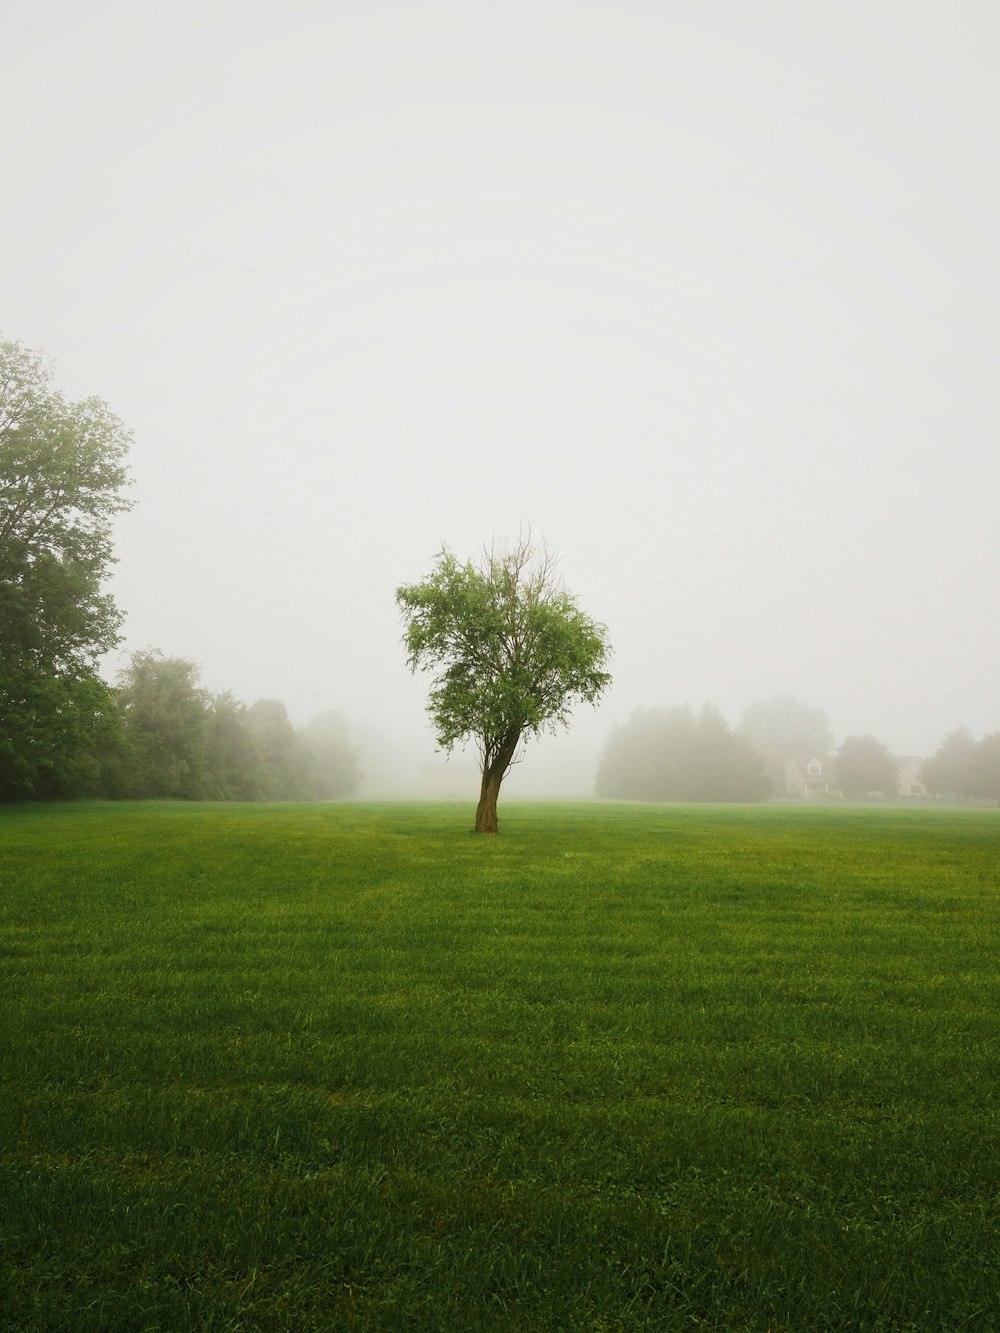 green tree on green grass field during foggy day